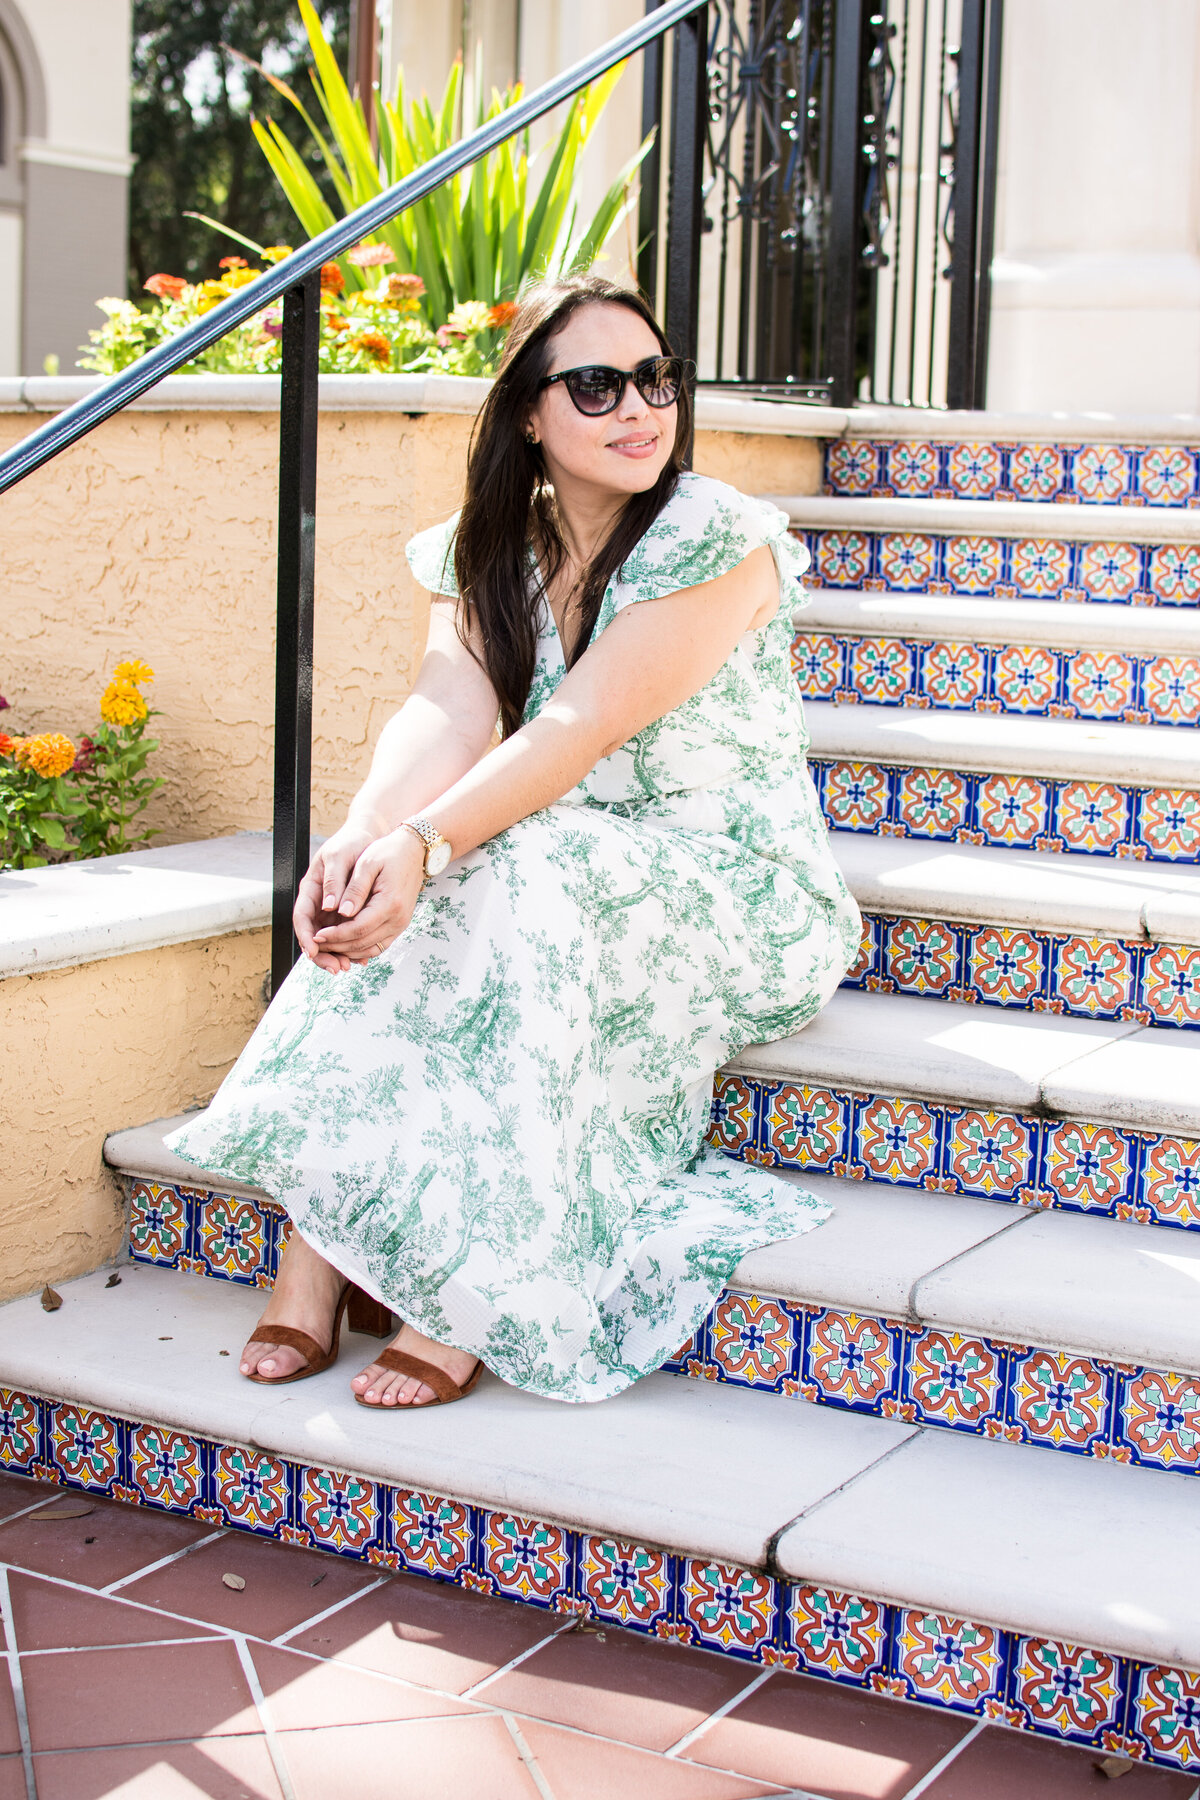 Woman with dark hair in white and green floral dress sits on stairs with decorative tiles